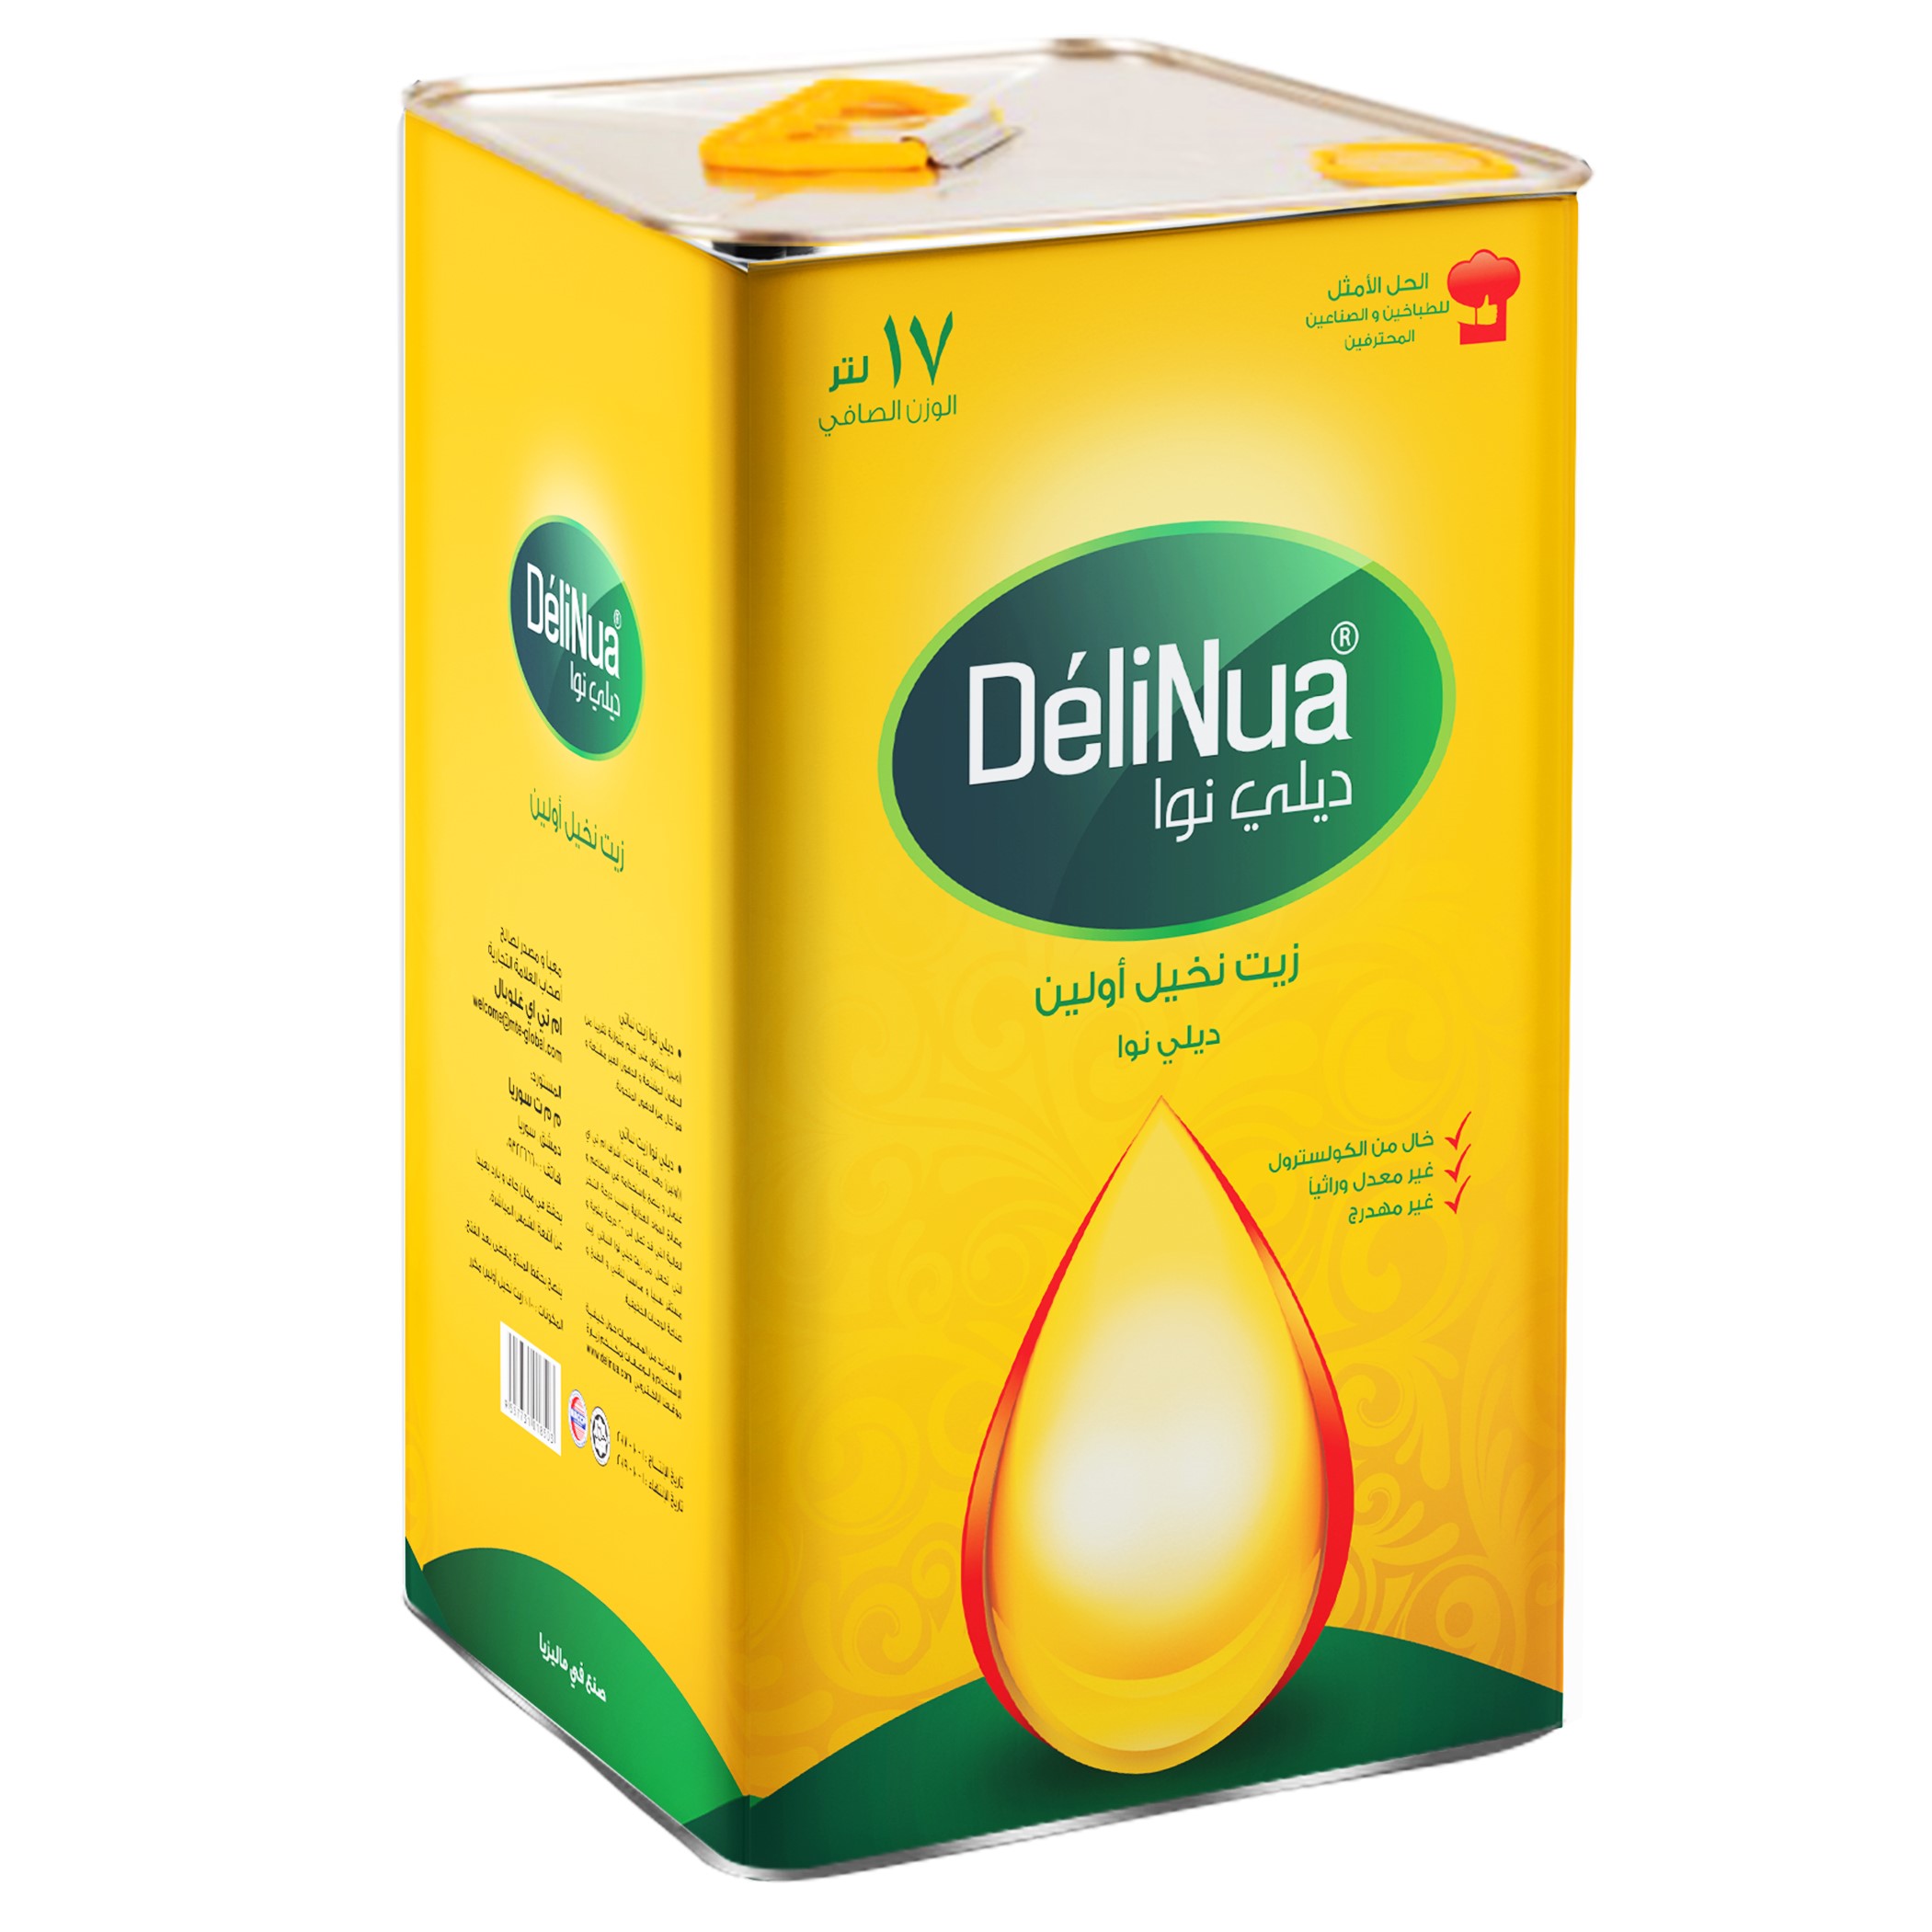 Delinua RBD Palm Olein Vegetable Oil packed in 17 Ltr Tin